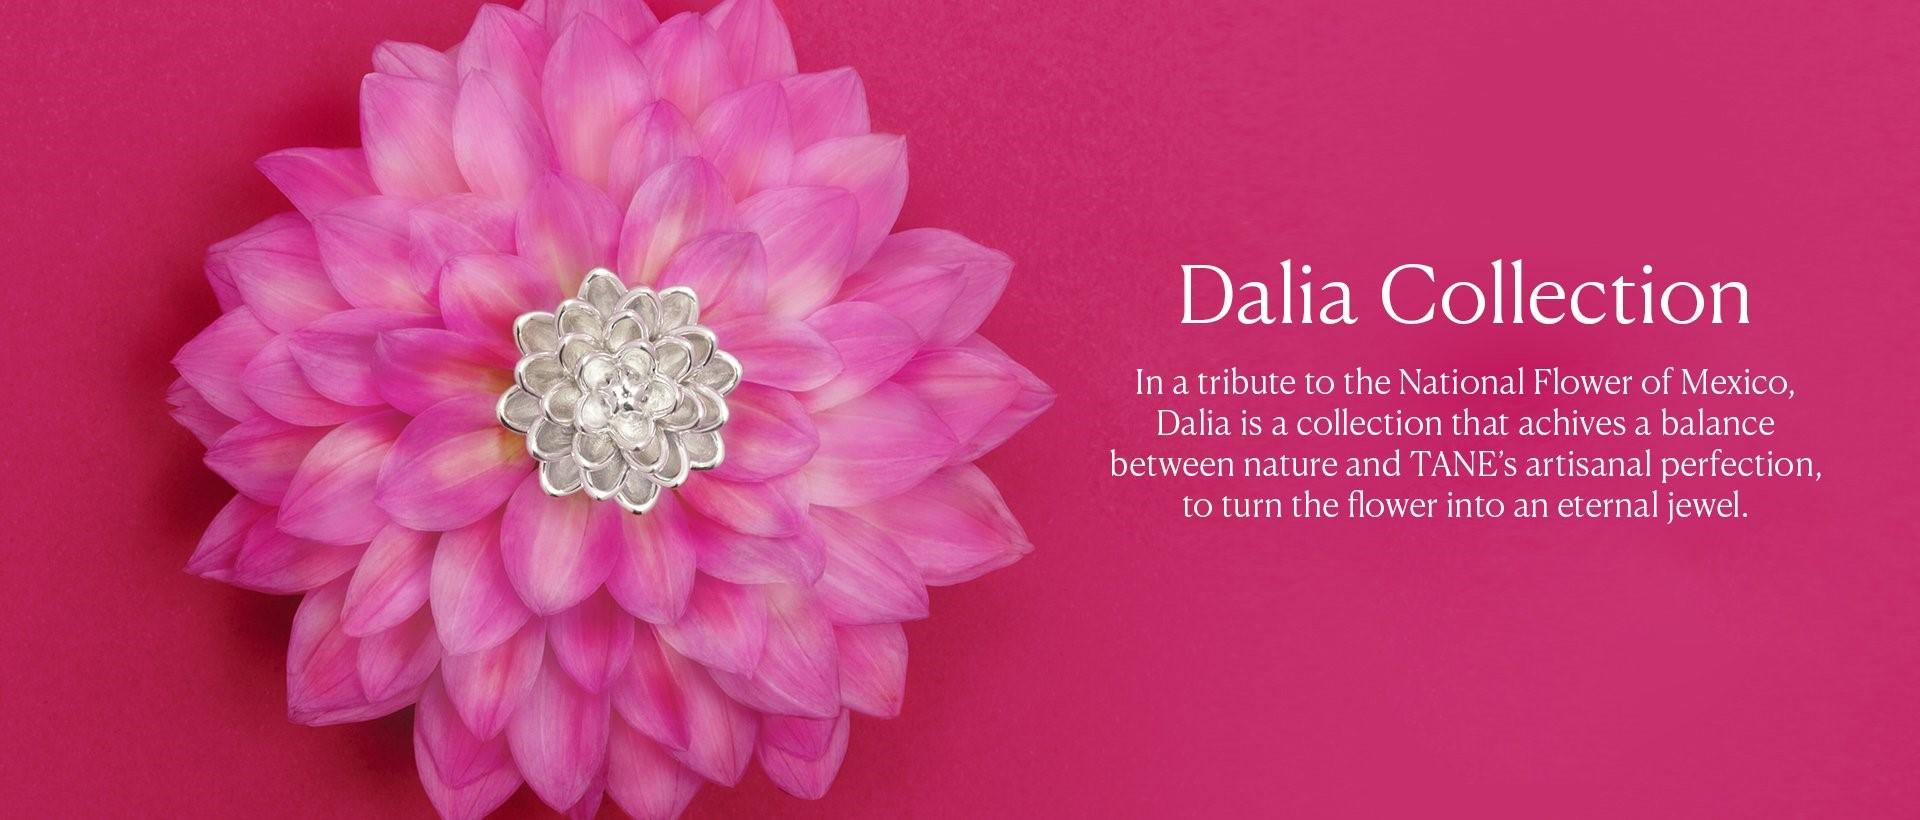 Inspired by the Dahlia, Mexico's beautiful national flower,this charm is handmade in .925 silver.Inspired by the Dahlia, Mexico’s beautiful national flower, this collection is presented in full Bloom with all the crowned circles characteristic of